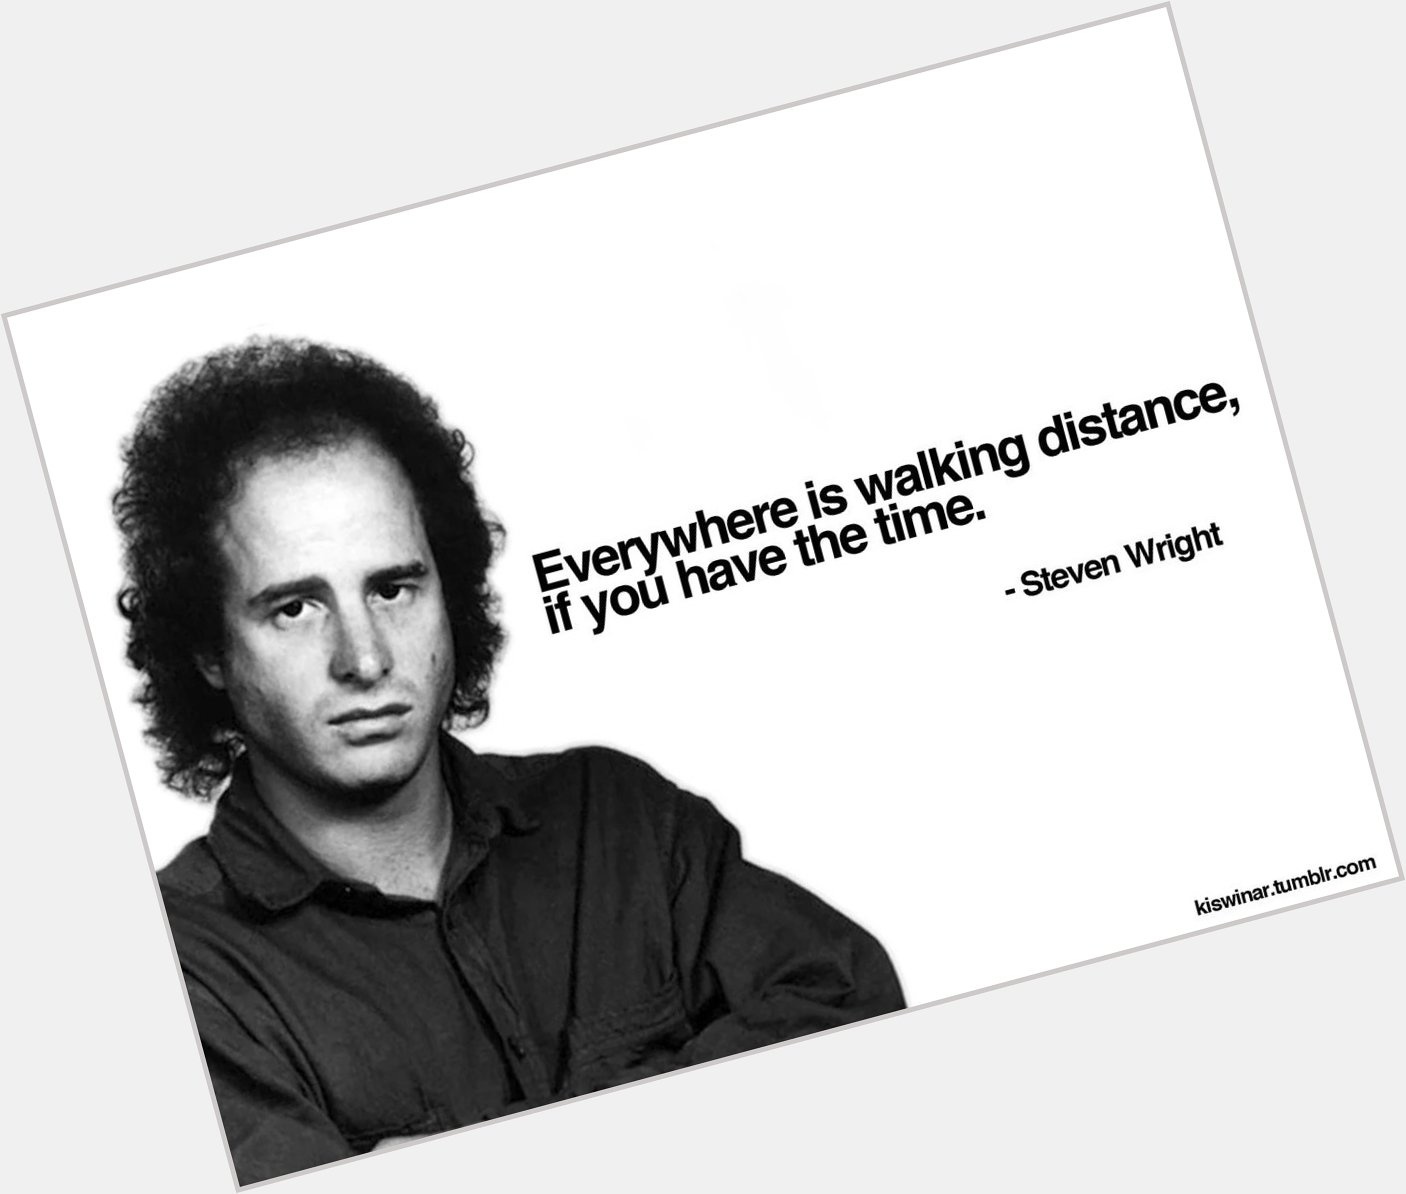 A very happy birthday to my favorite stand-up comic, Steven Wright. 